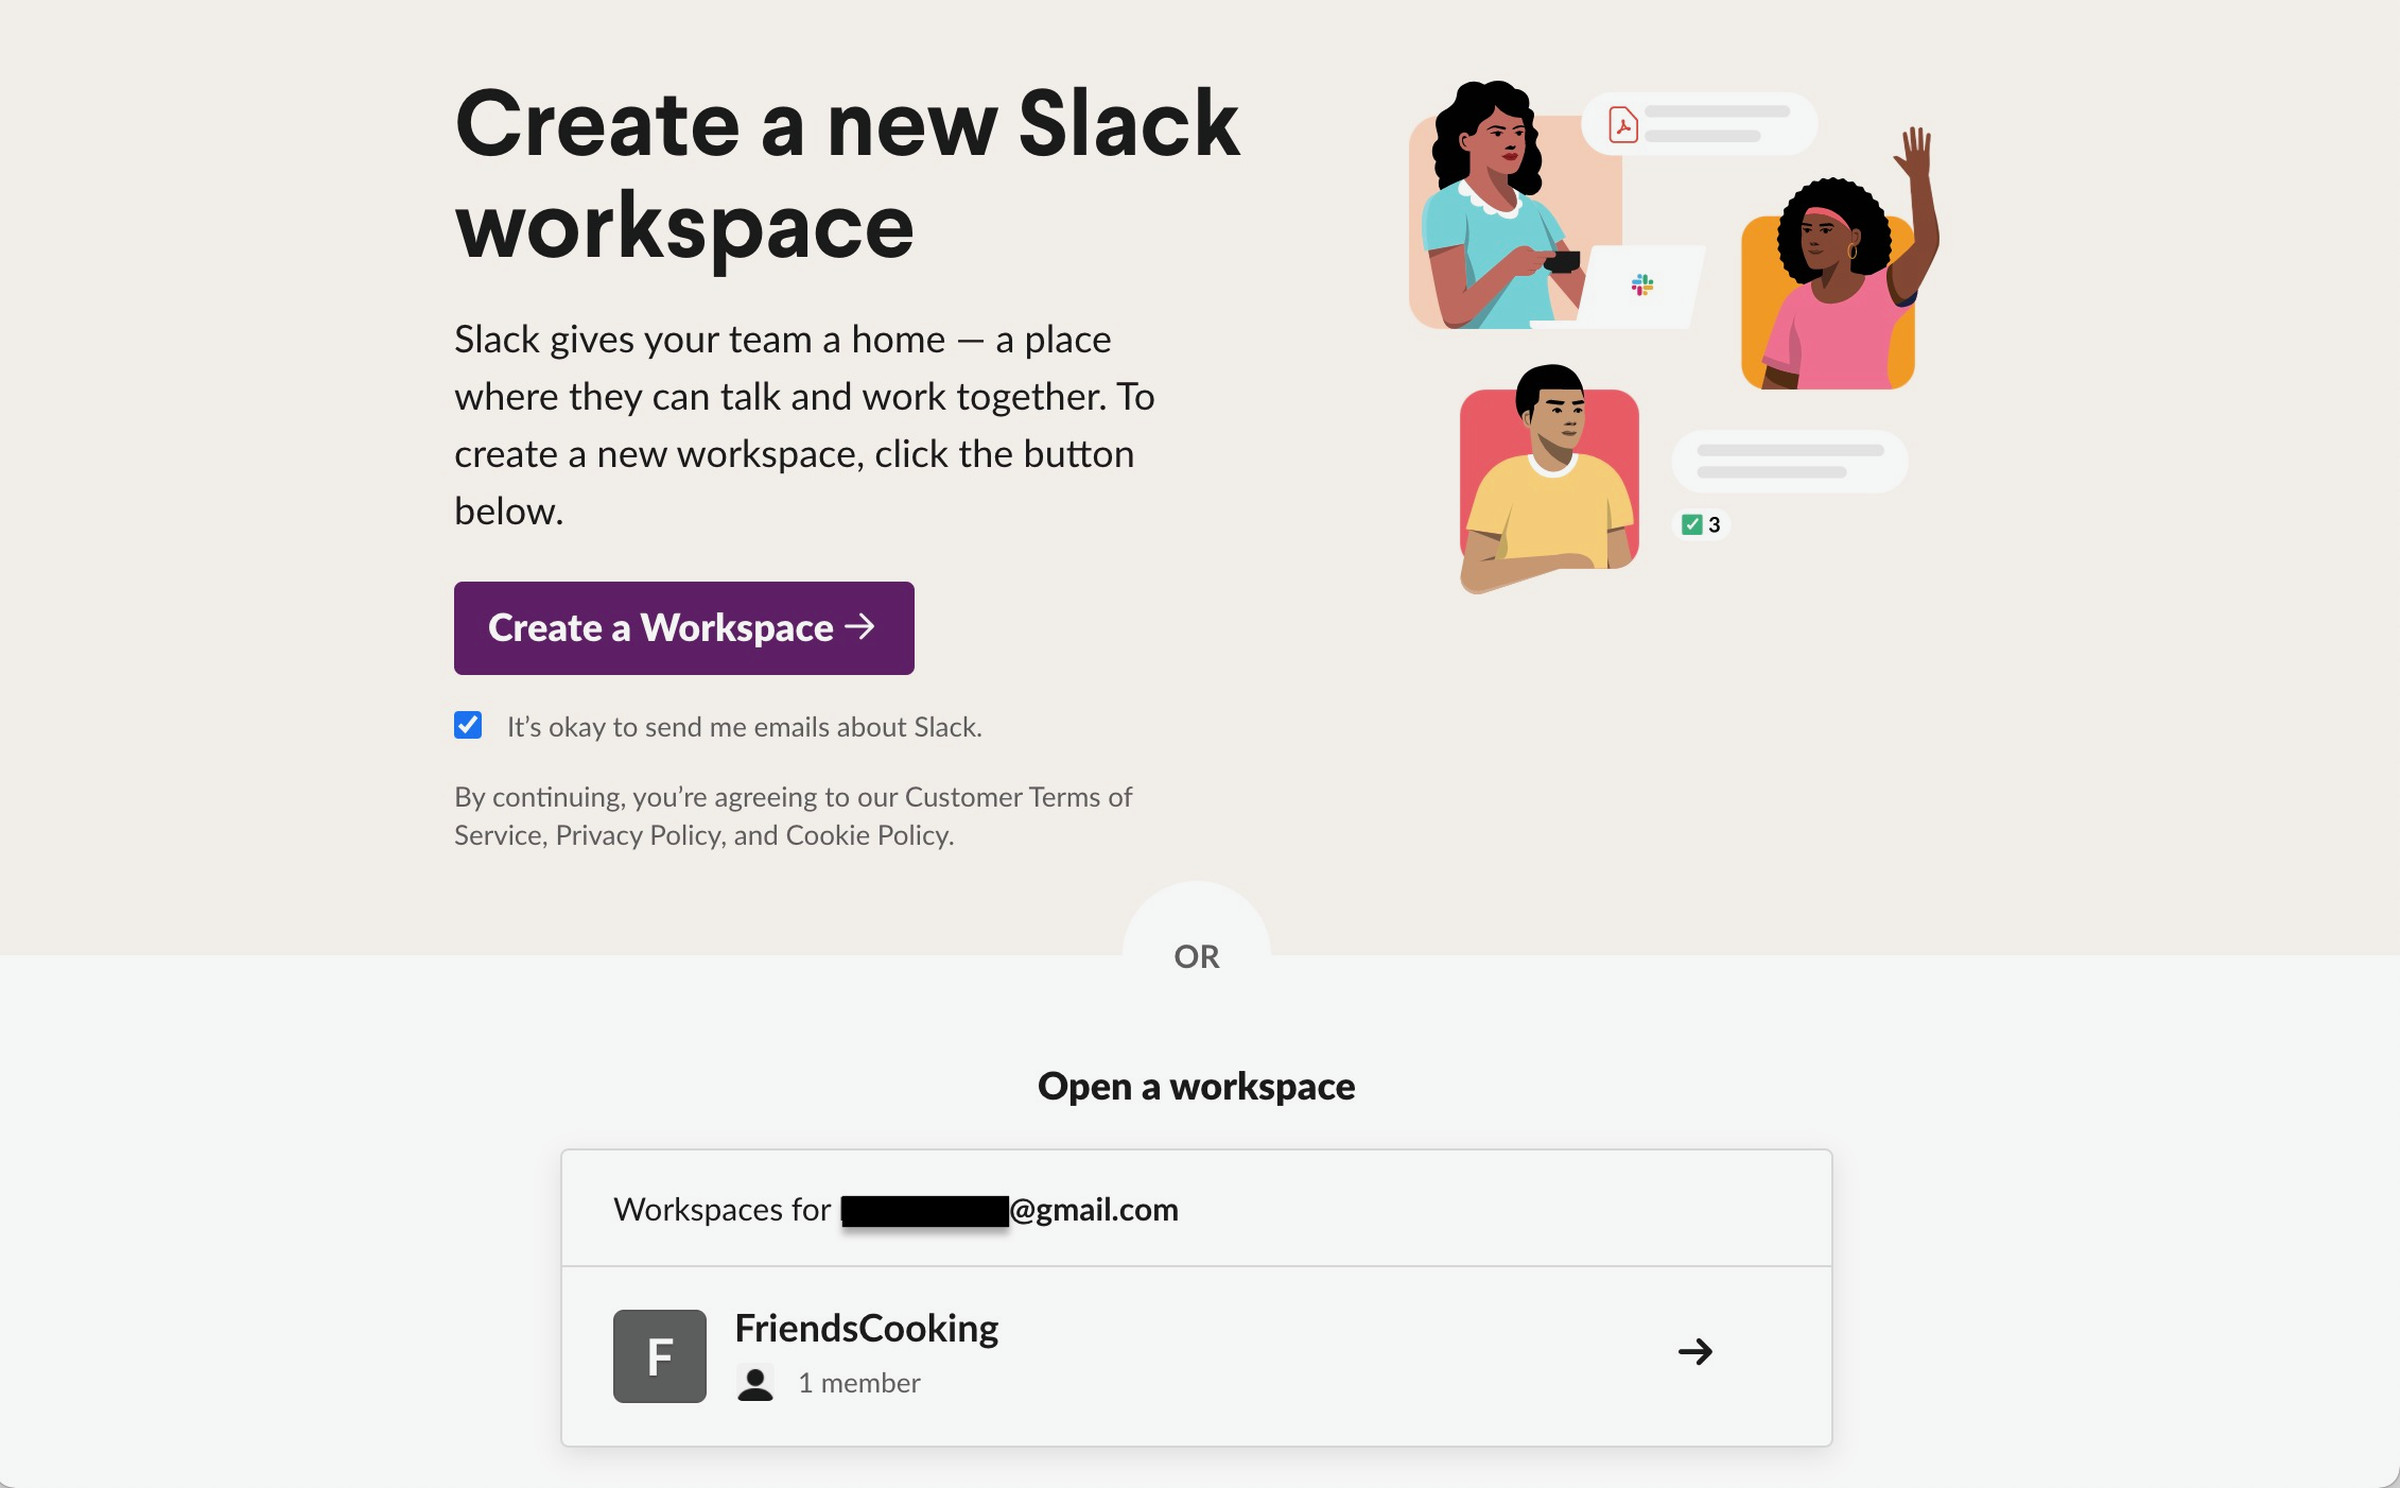 You can create a workspace or join an existing one.